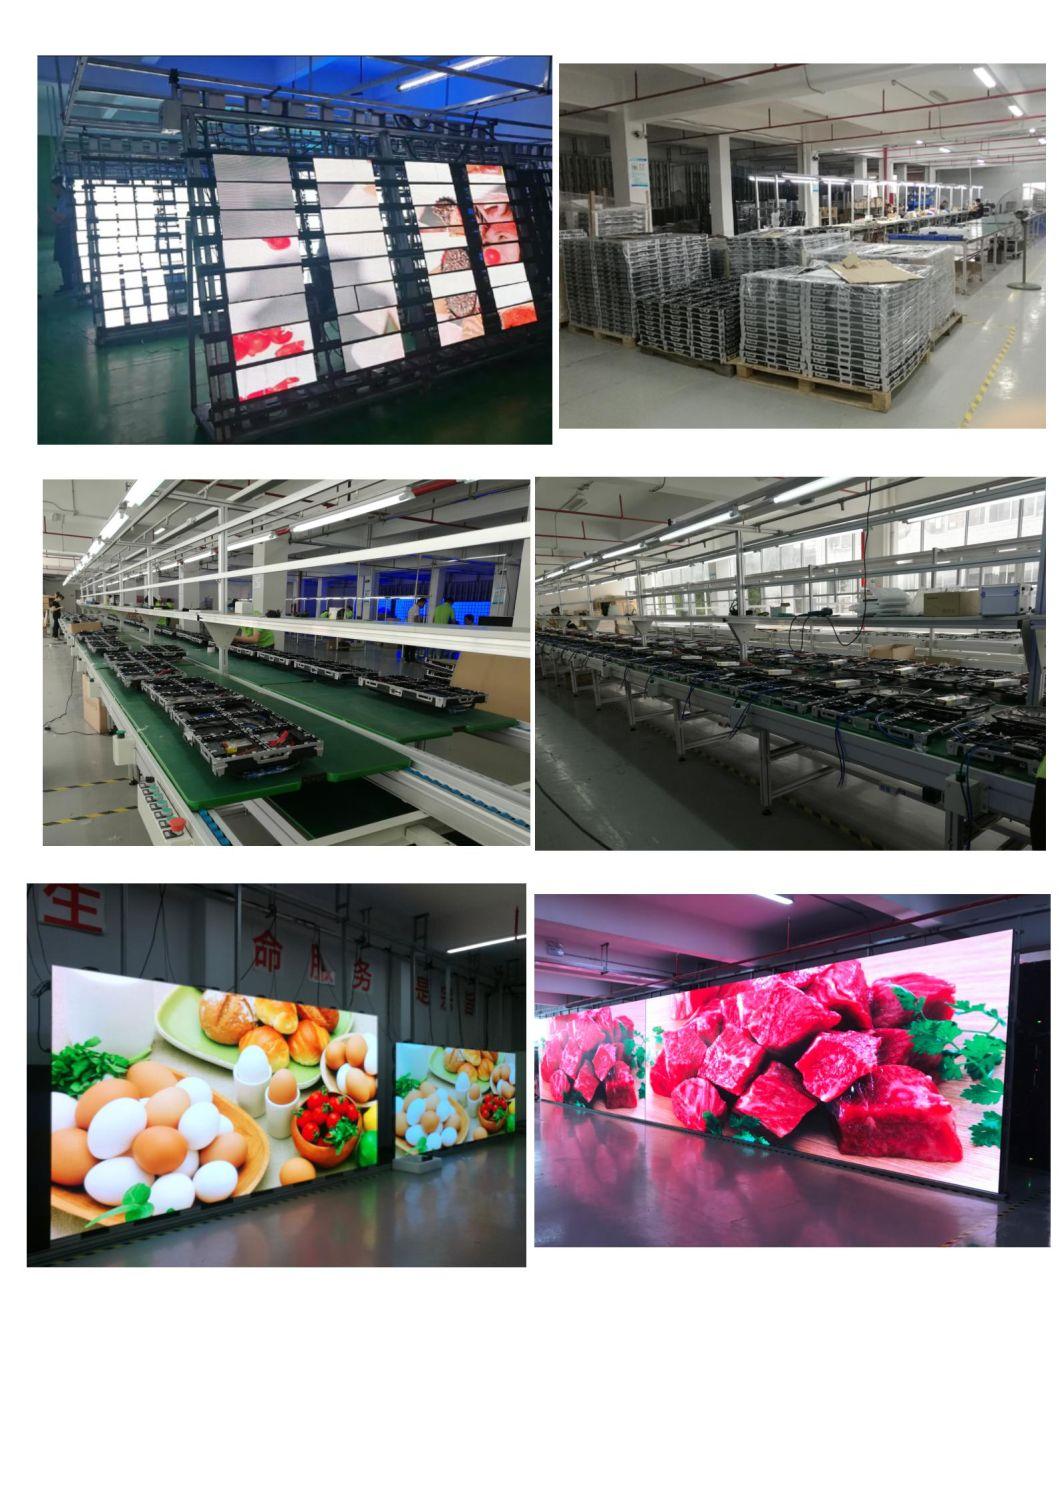 Outdoor Full Color P3.91 LED Display Screen for Background Performance